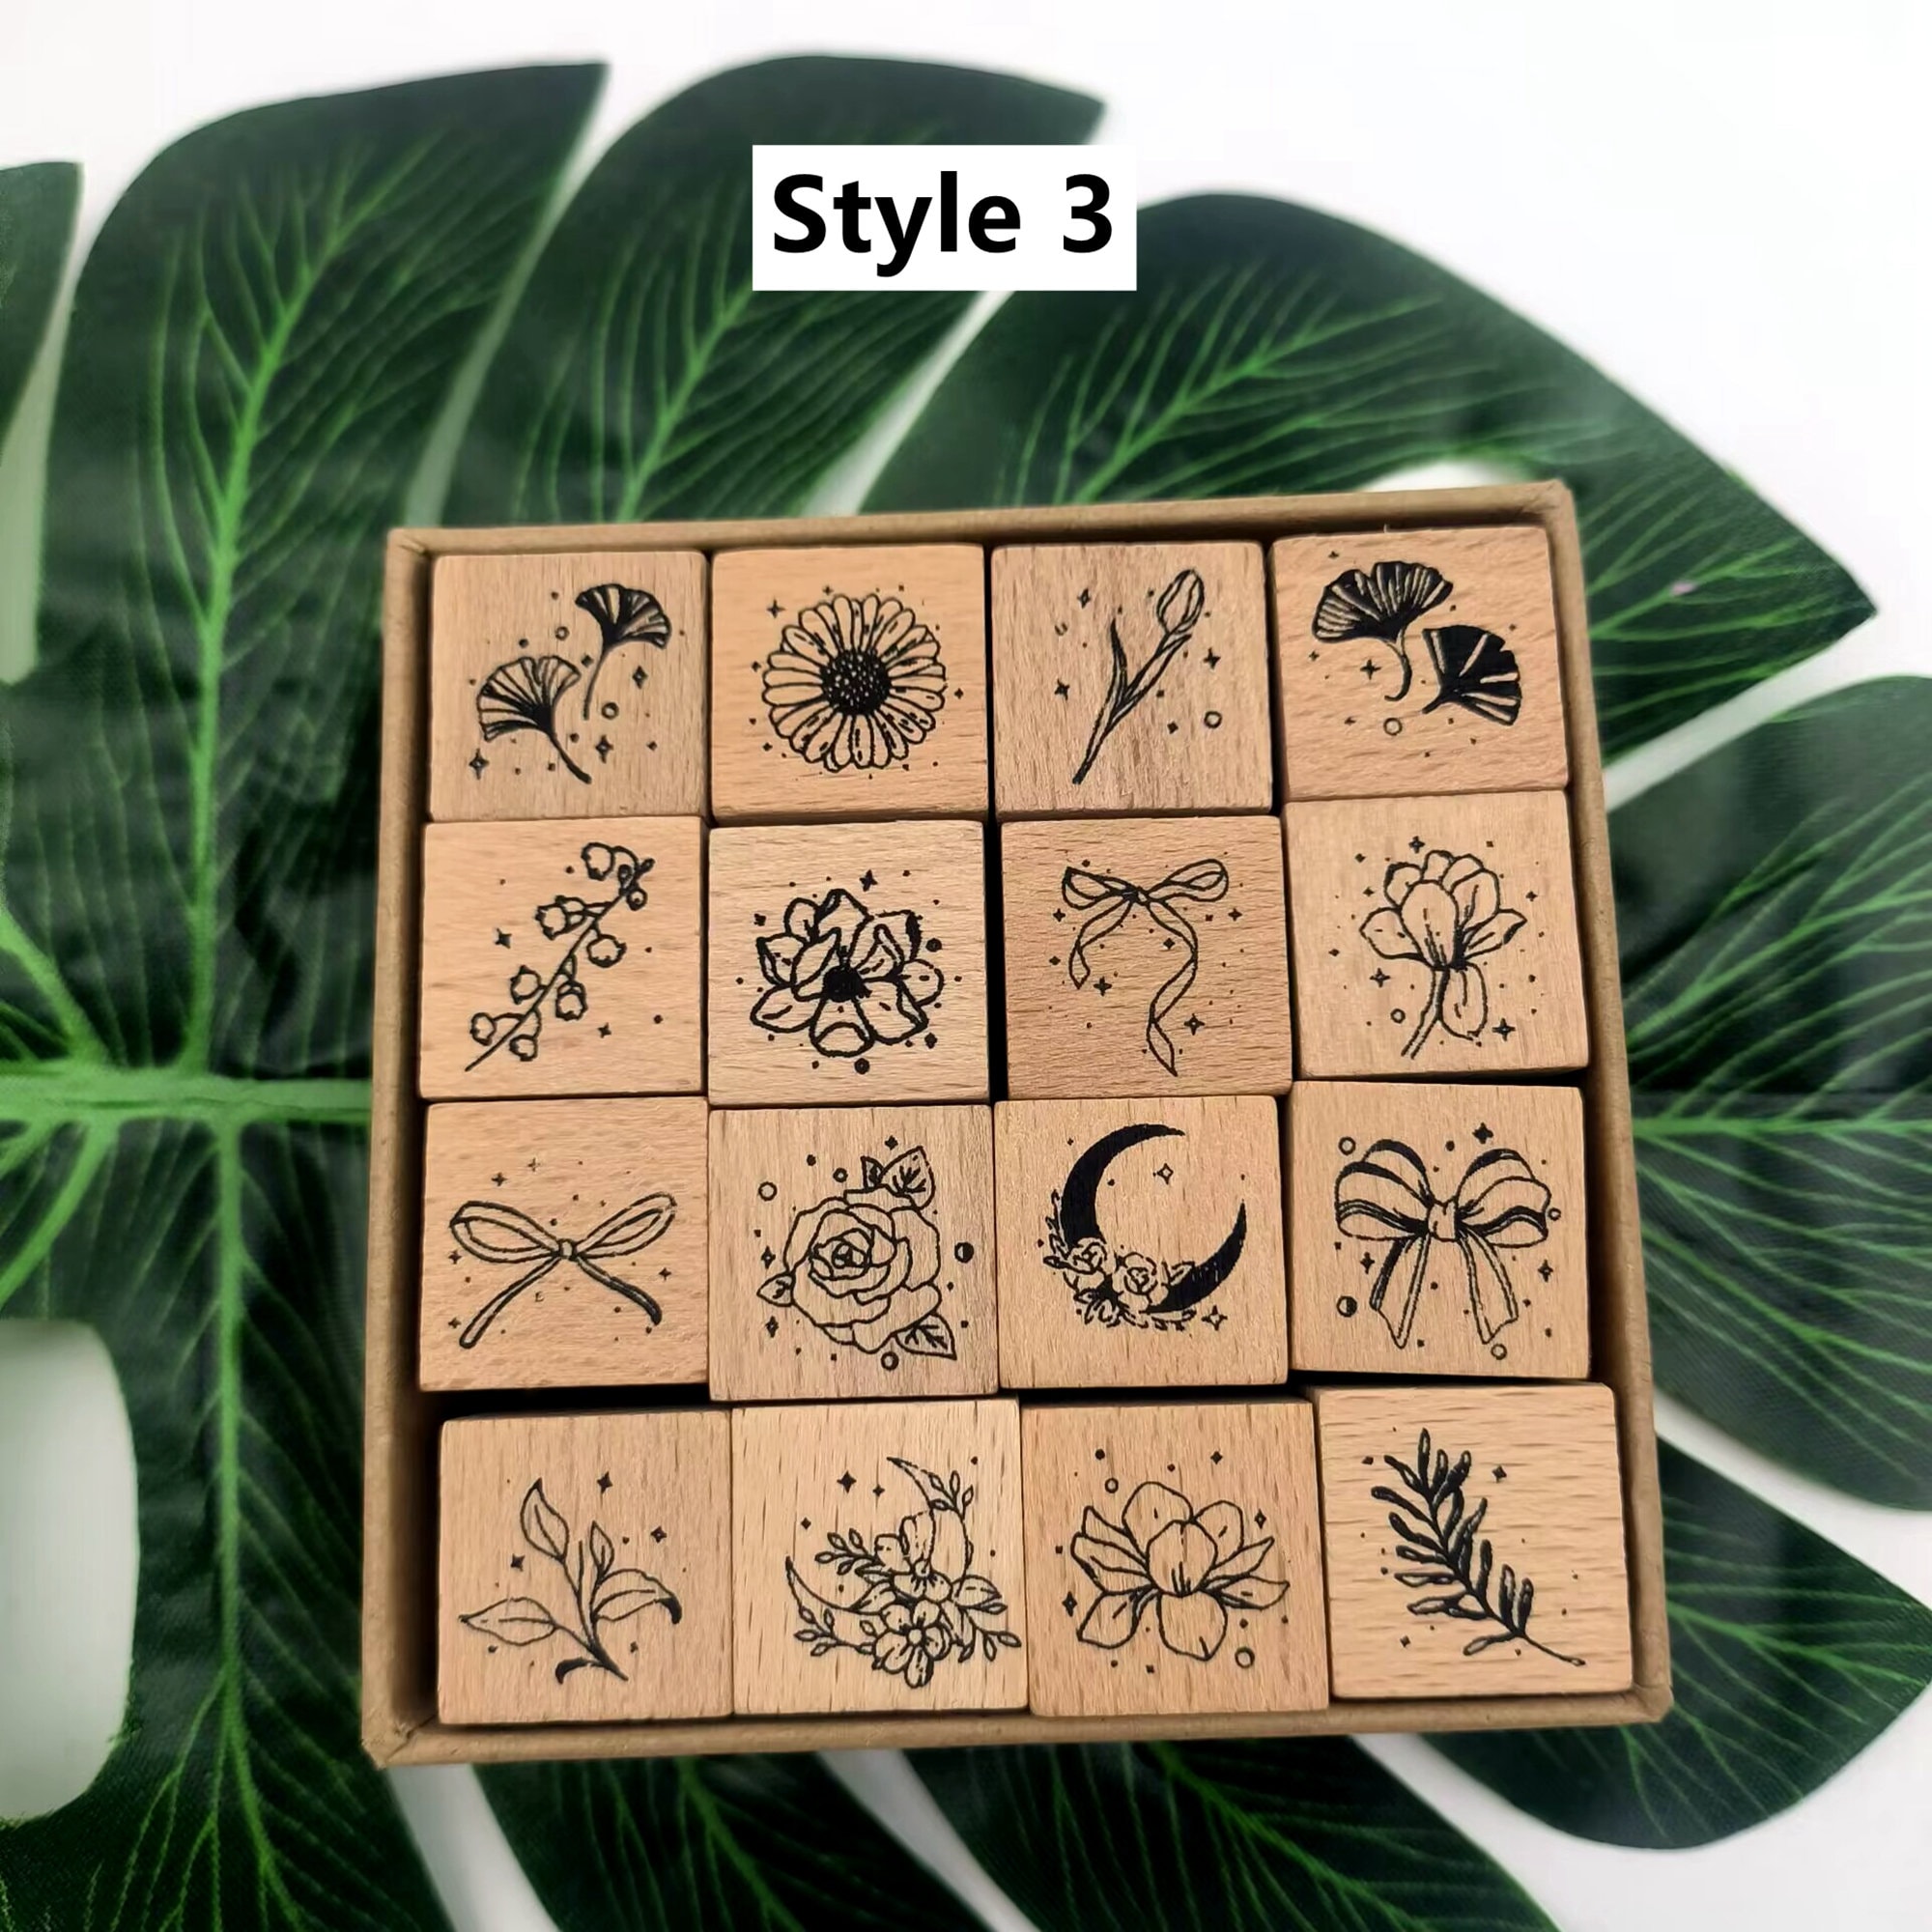 Tofficu 6pcs Rubber Stamps for Crafting Decorative Journal Stamp Journaling  Star Stamp Rustic Rubber Stamp Animal Decor Journal Stamps Kids